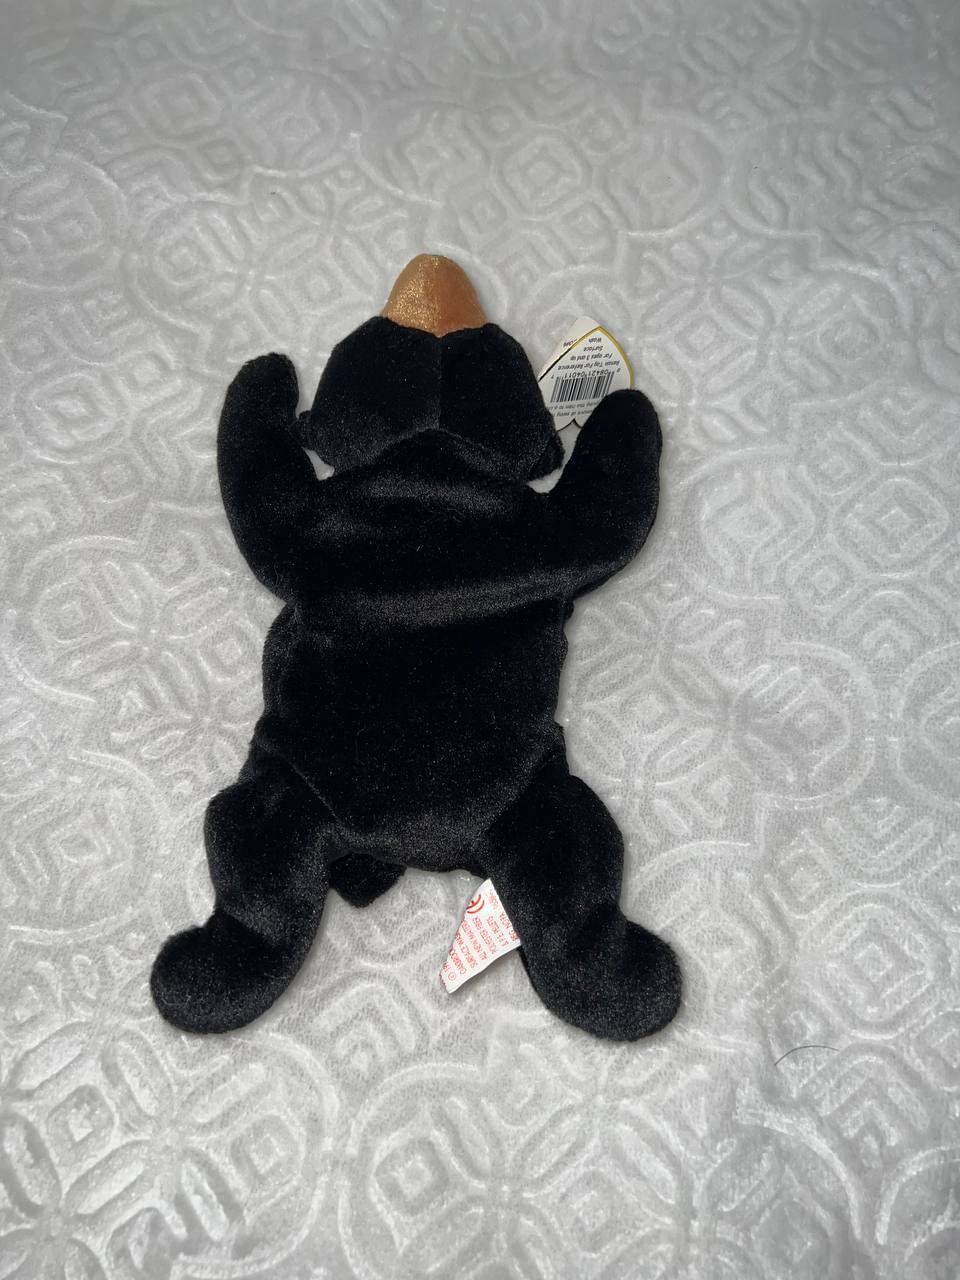 *RARE* MINT Blackie Beanie Baby 1994 With Tag